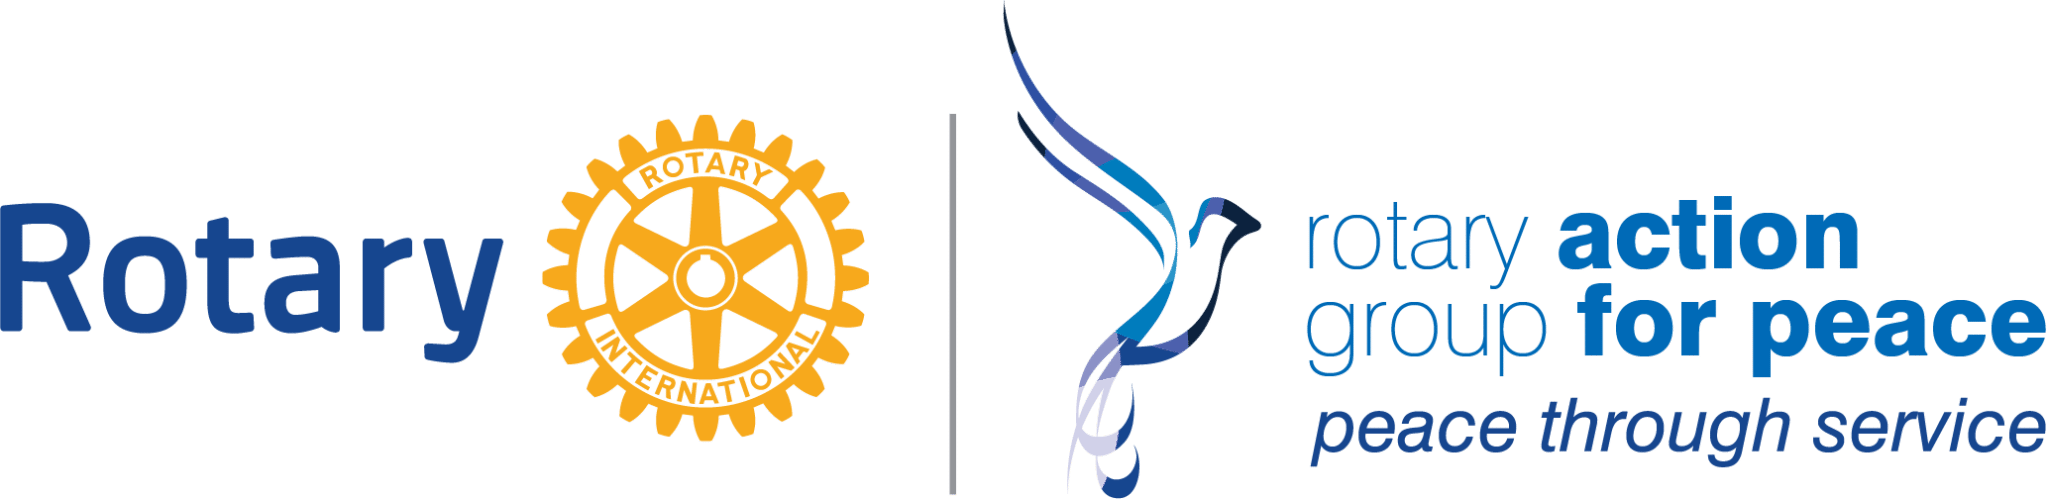 Rotarian Action Group for Peace